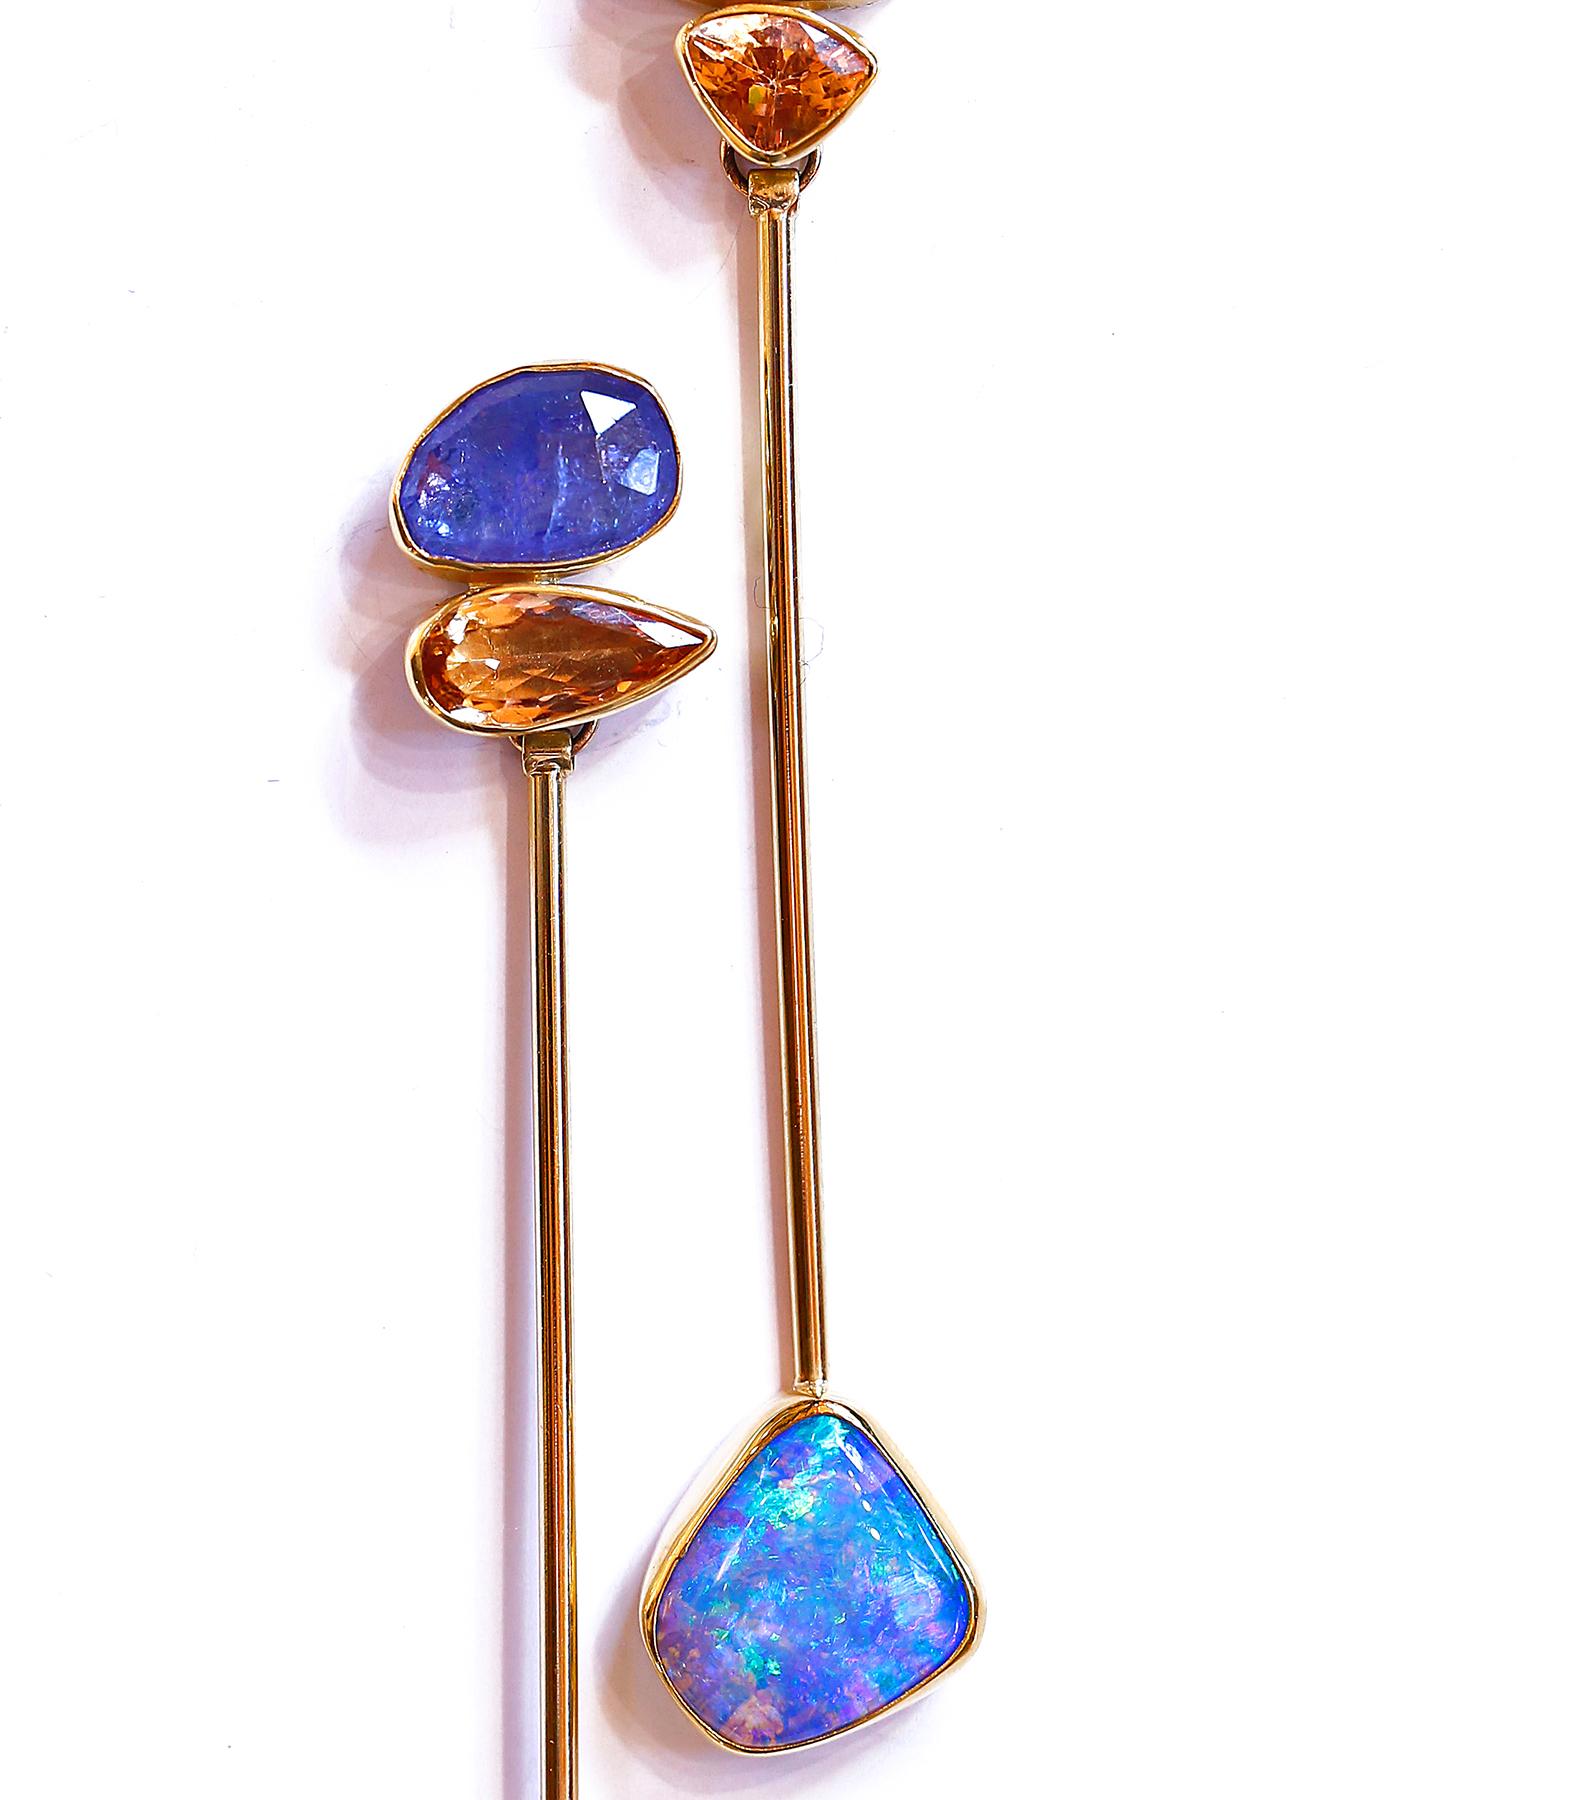 A really great looking pendulum earring with opal in petrified wood, tanzanite and natural topaz.
Opal is found in many types of matrix's. These earrings are opal in petrified wood! Amazing really. The color and depth of the opal is lovely, framed